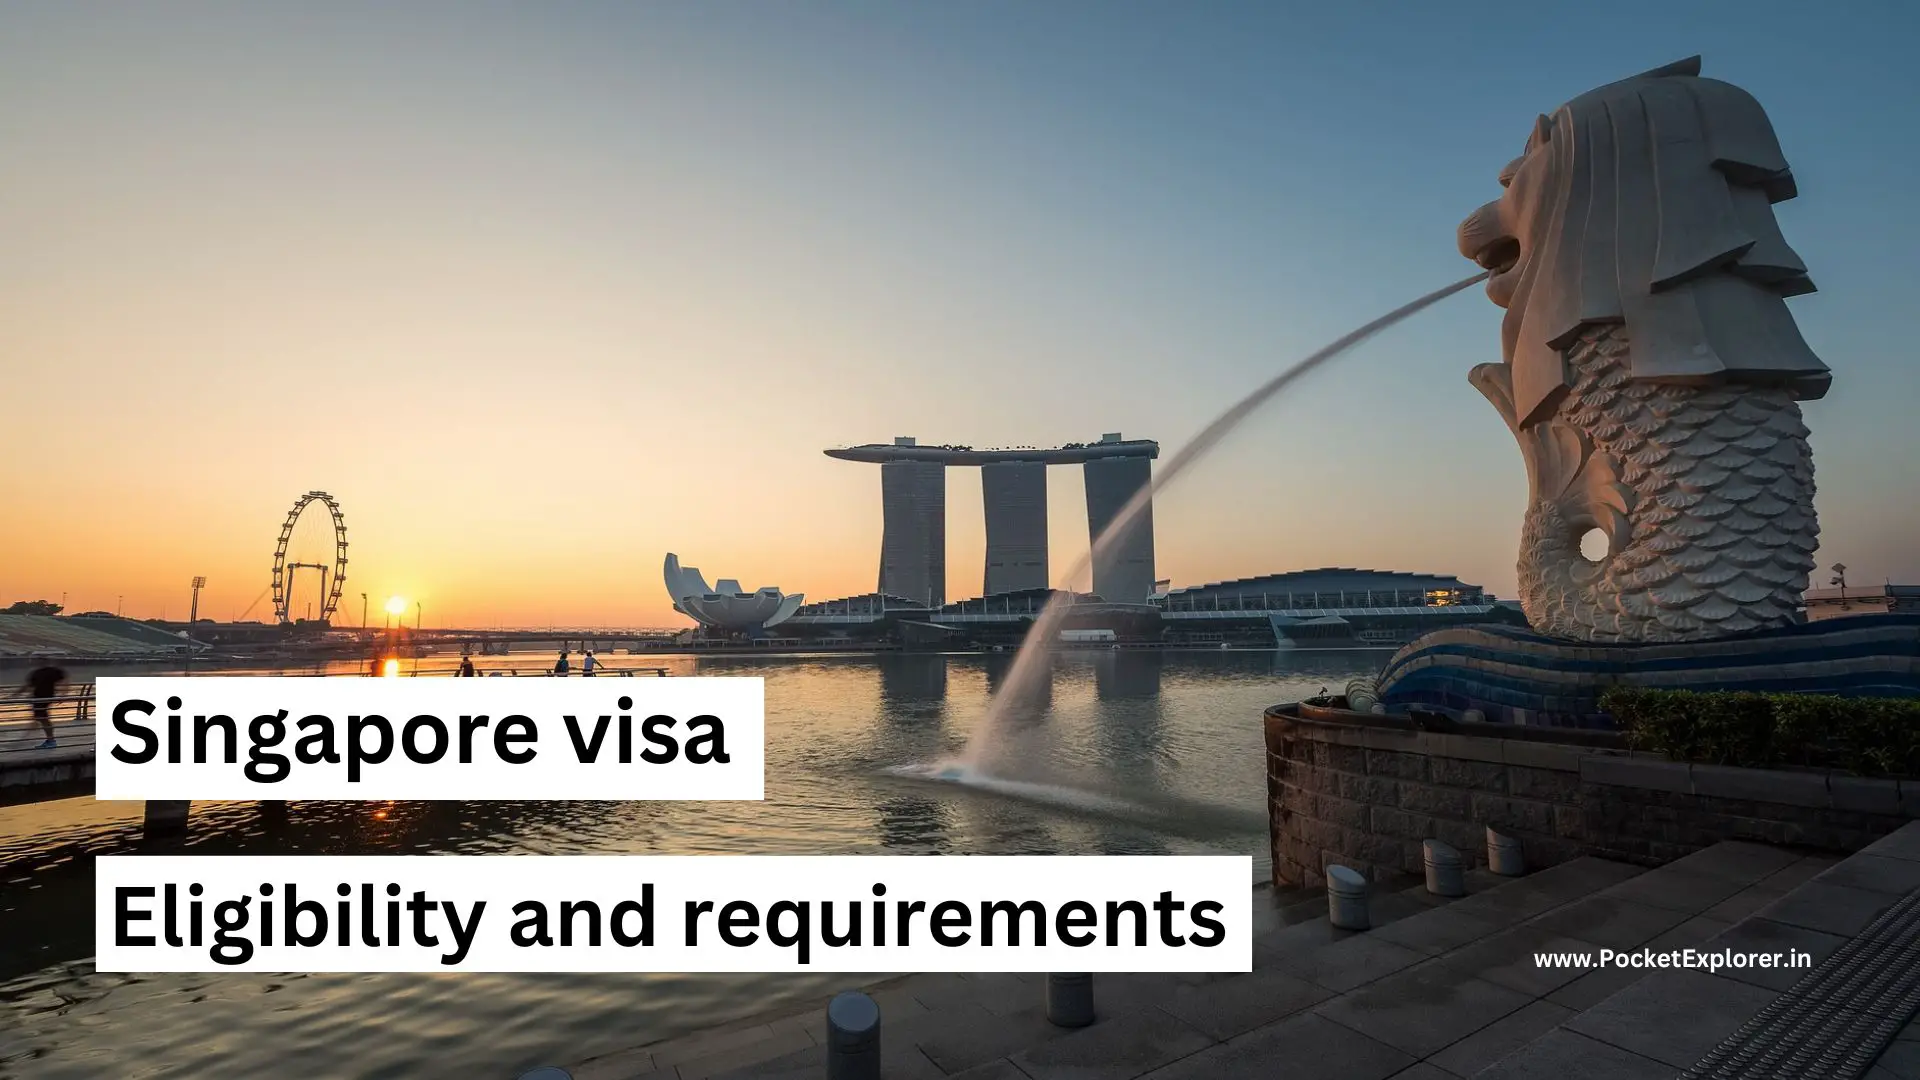 Singapore visa eligibility and requirements